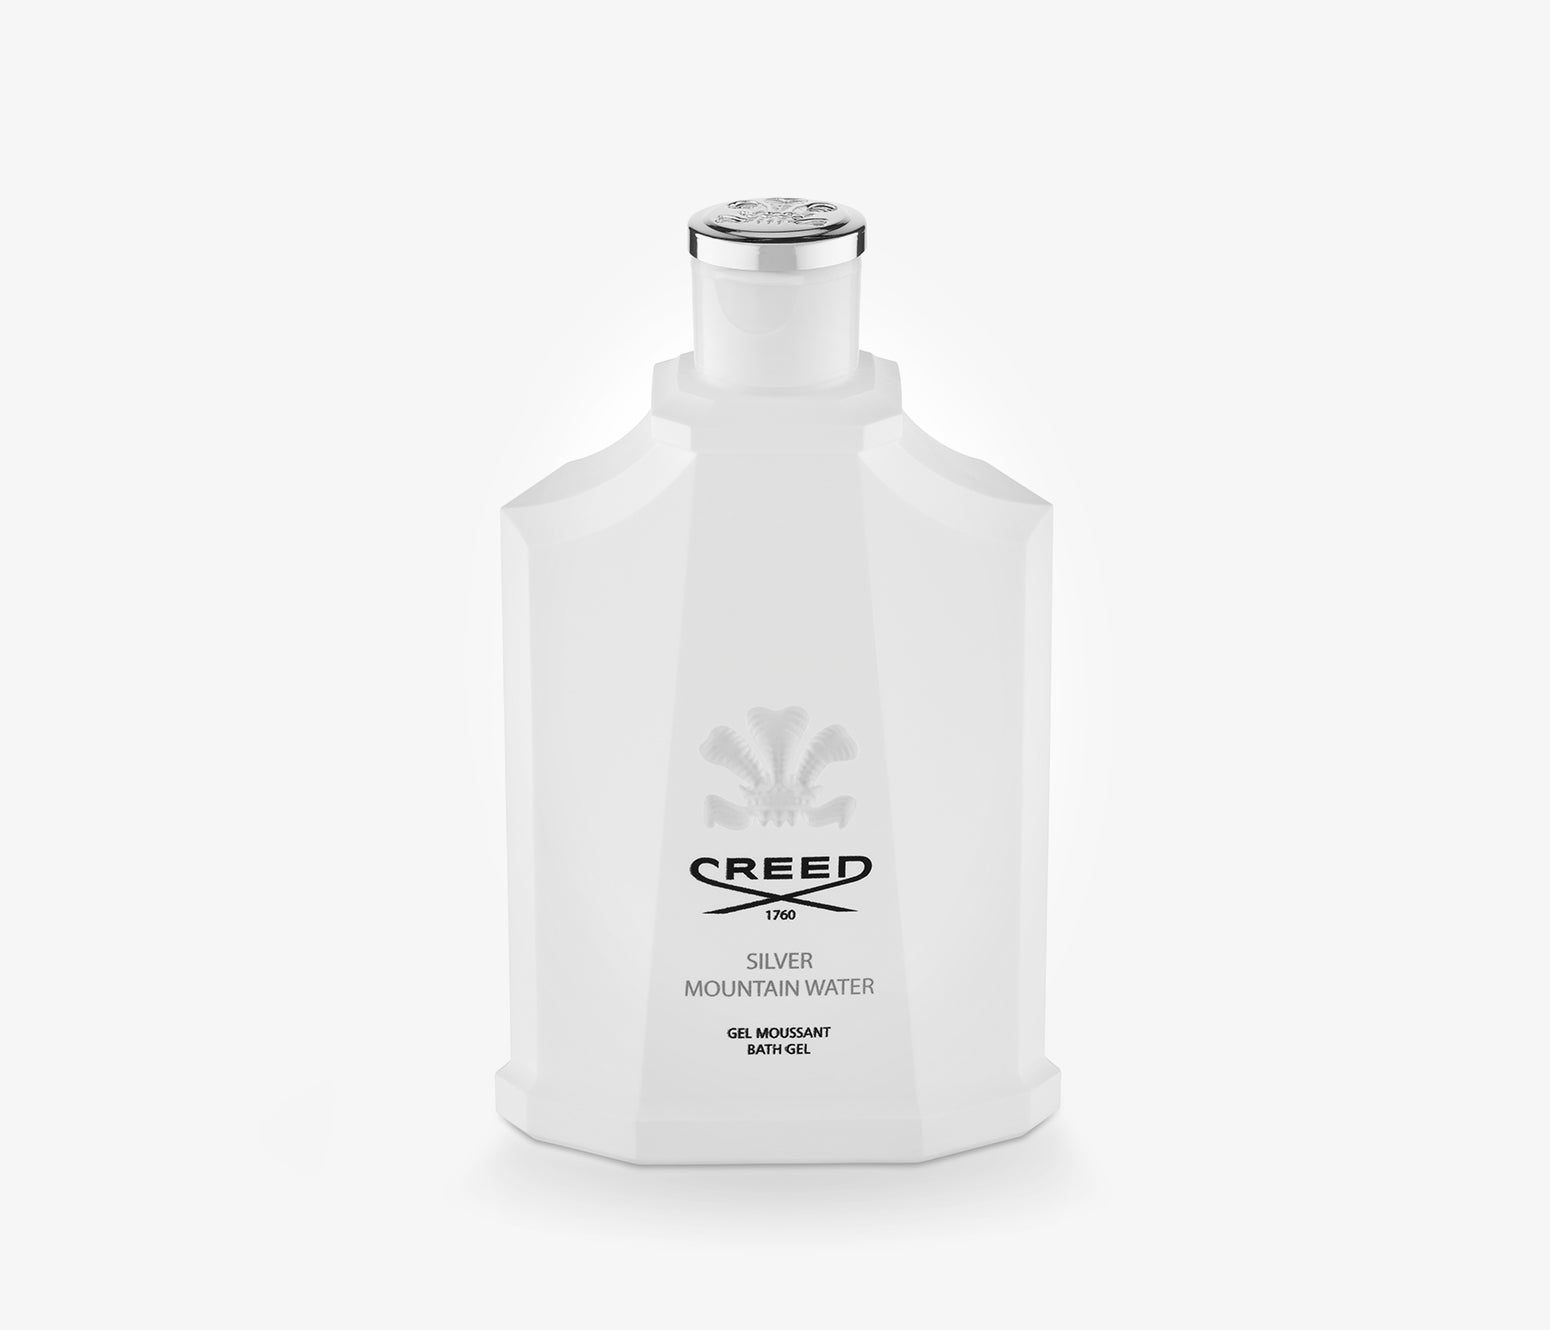 Creed - Silver Mountain Water Shower Gel - 200ml - '10000305 - product image - Body Wash - Les Senteurs